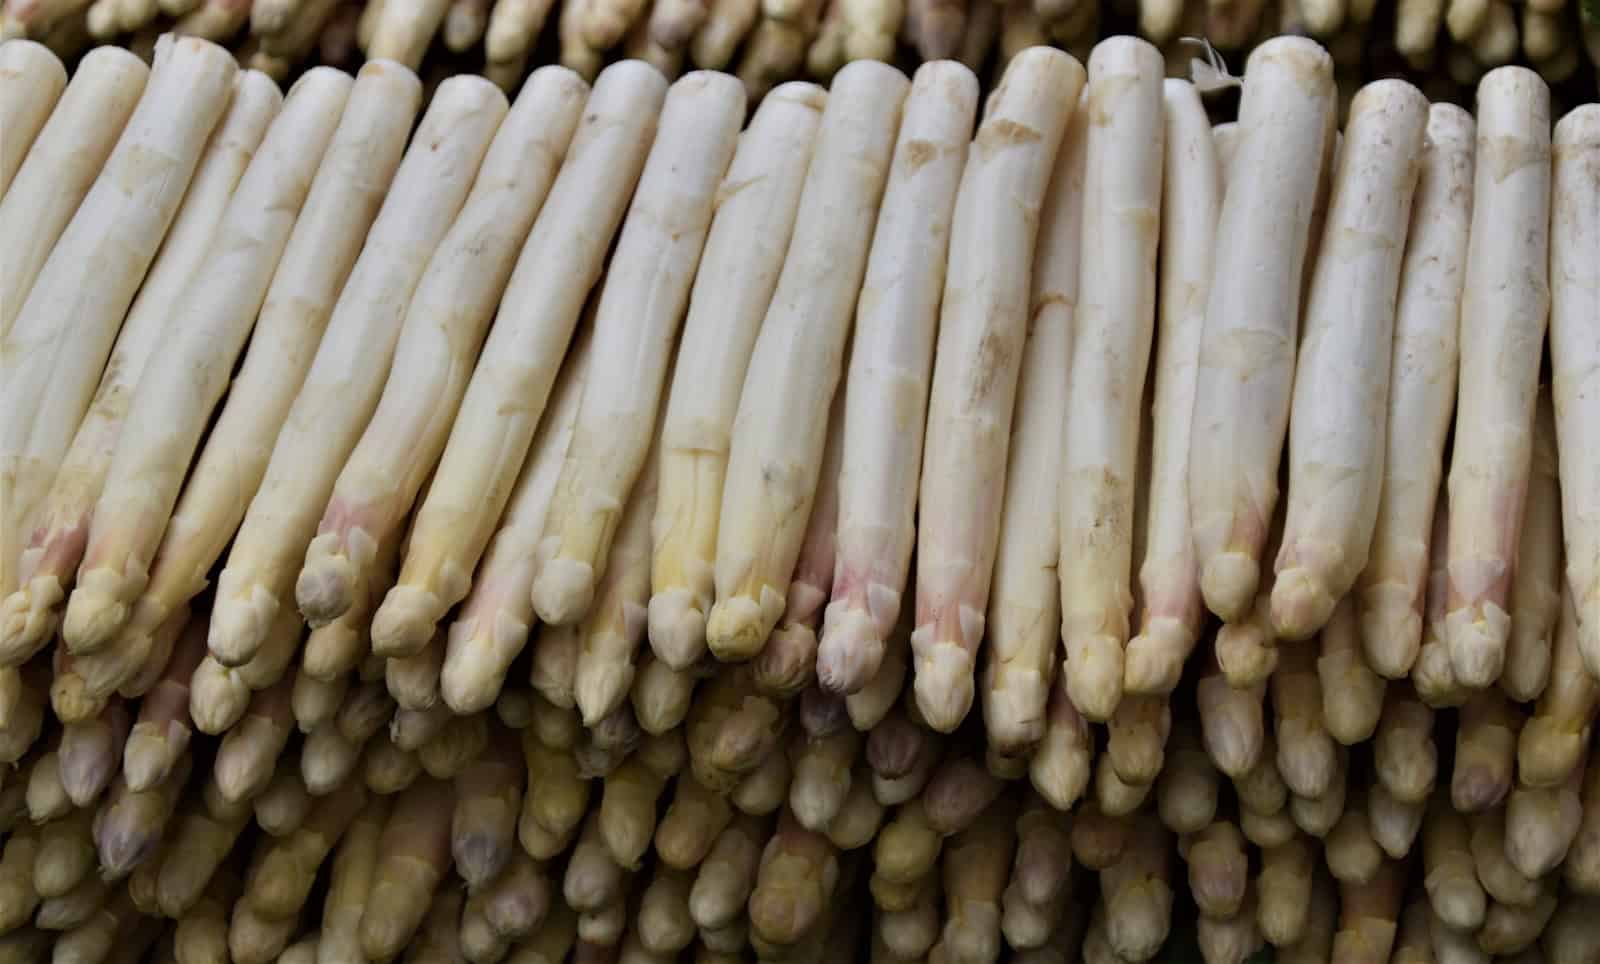 A stack of white asparagus in an open air market.